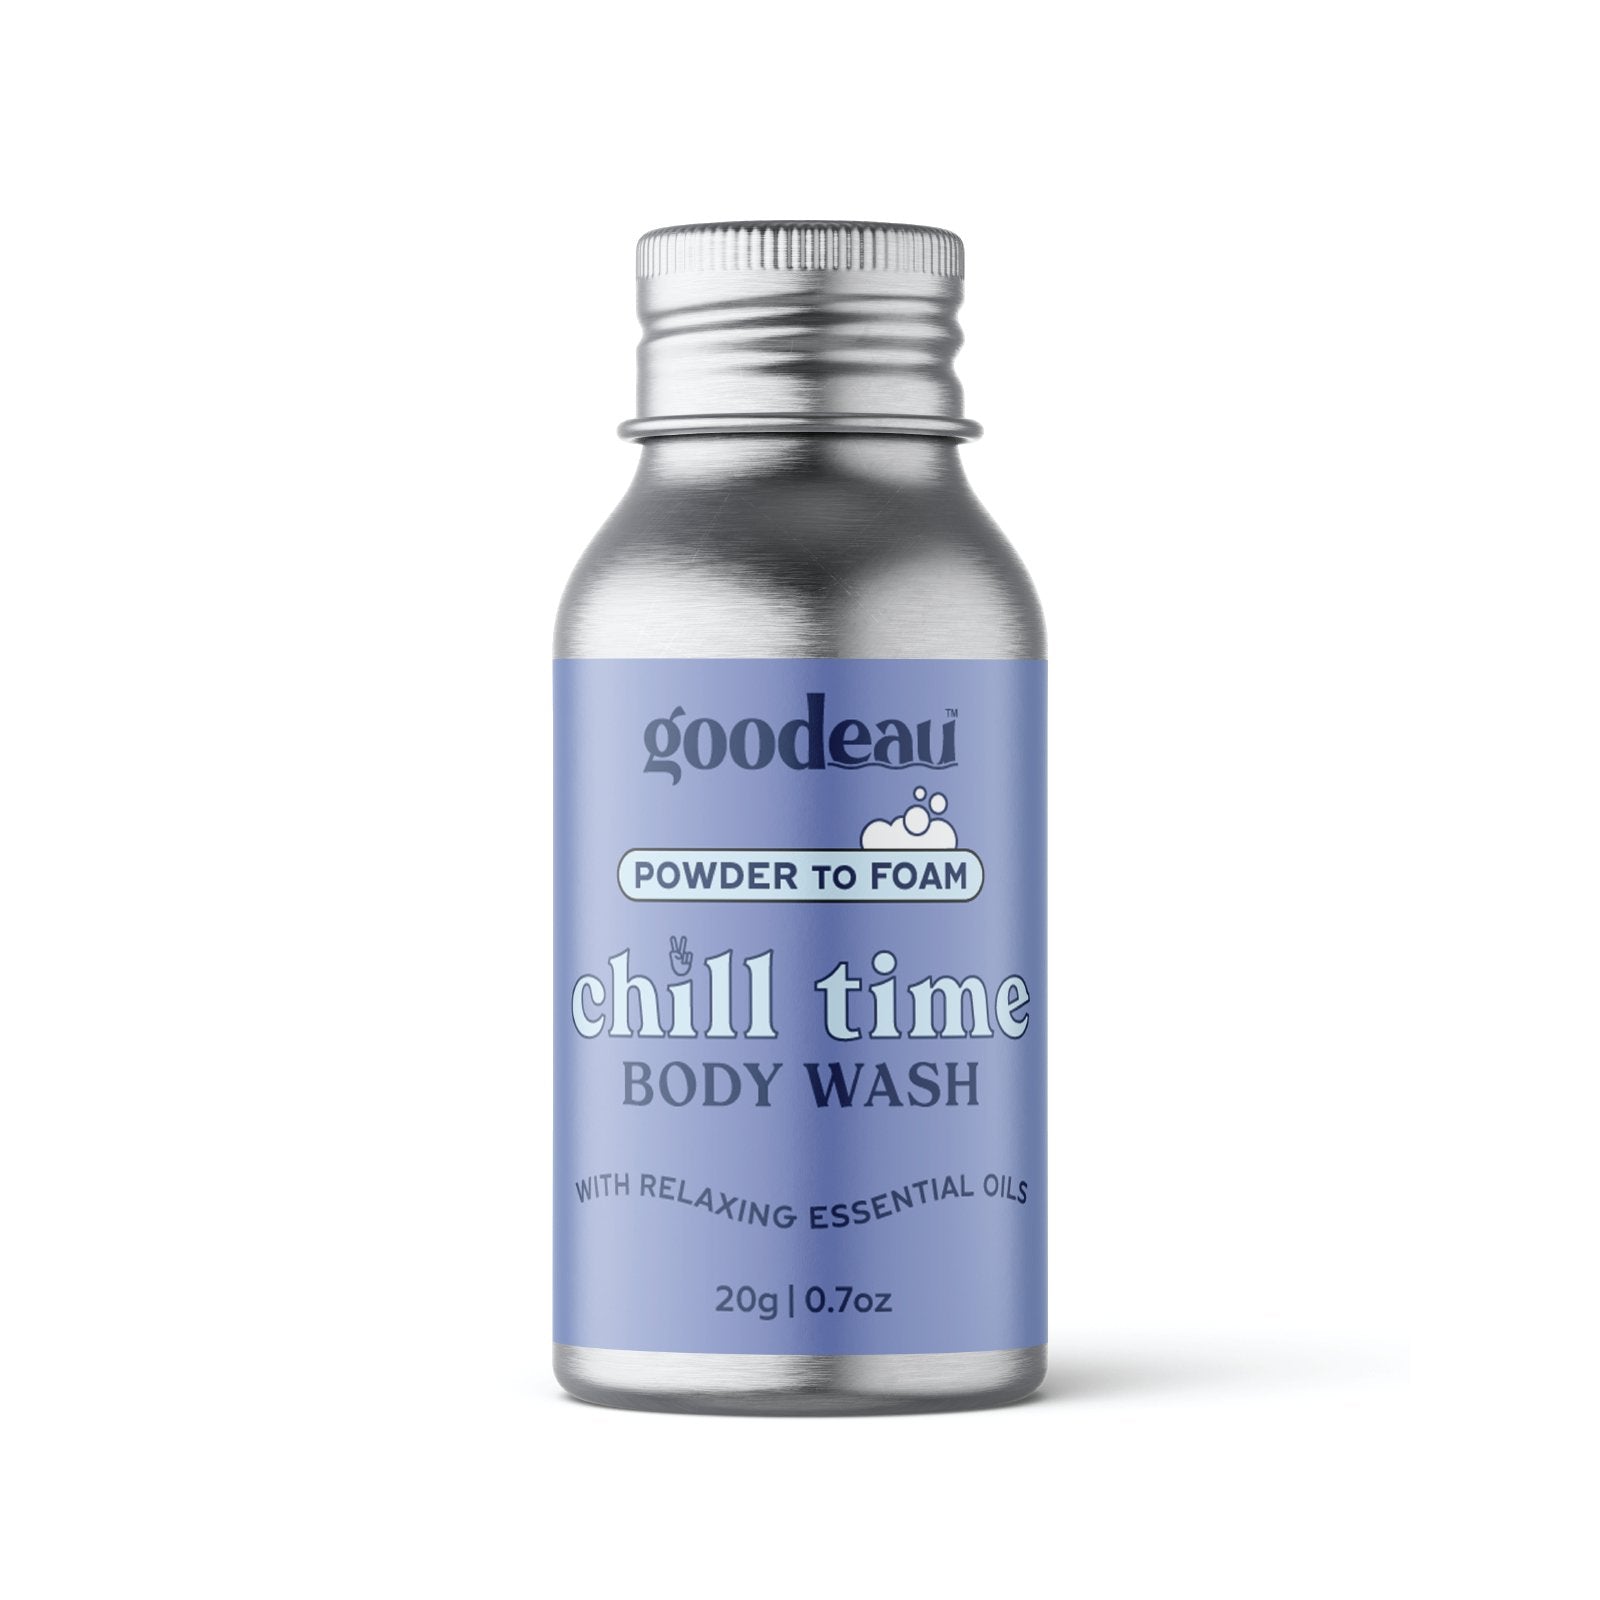 Chill Time Body Wash - Goodeau